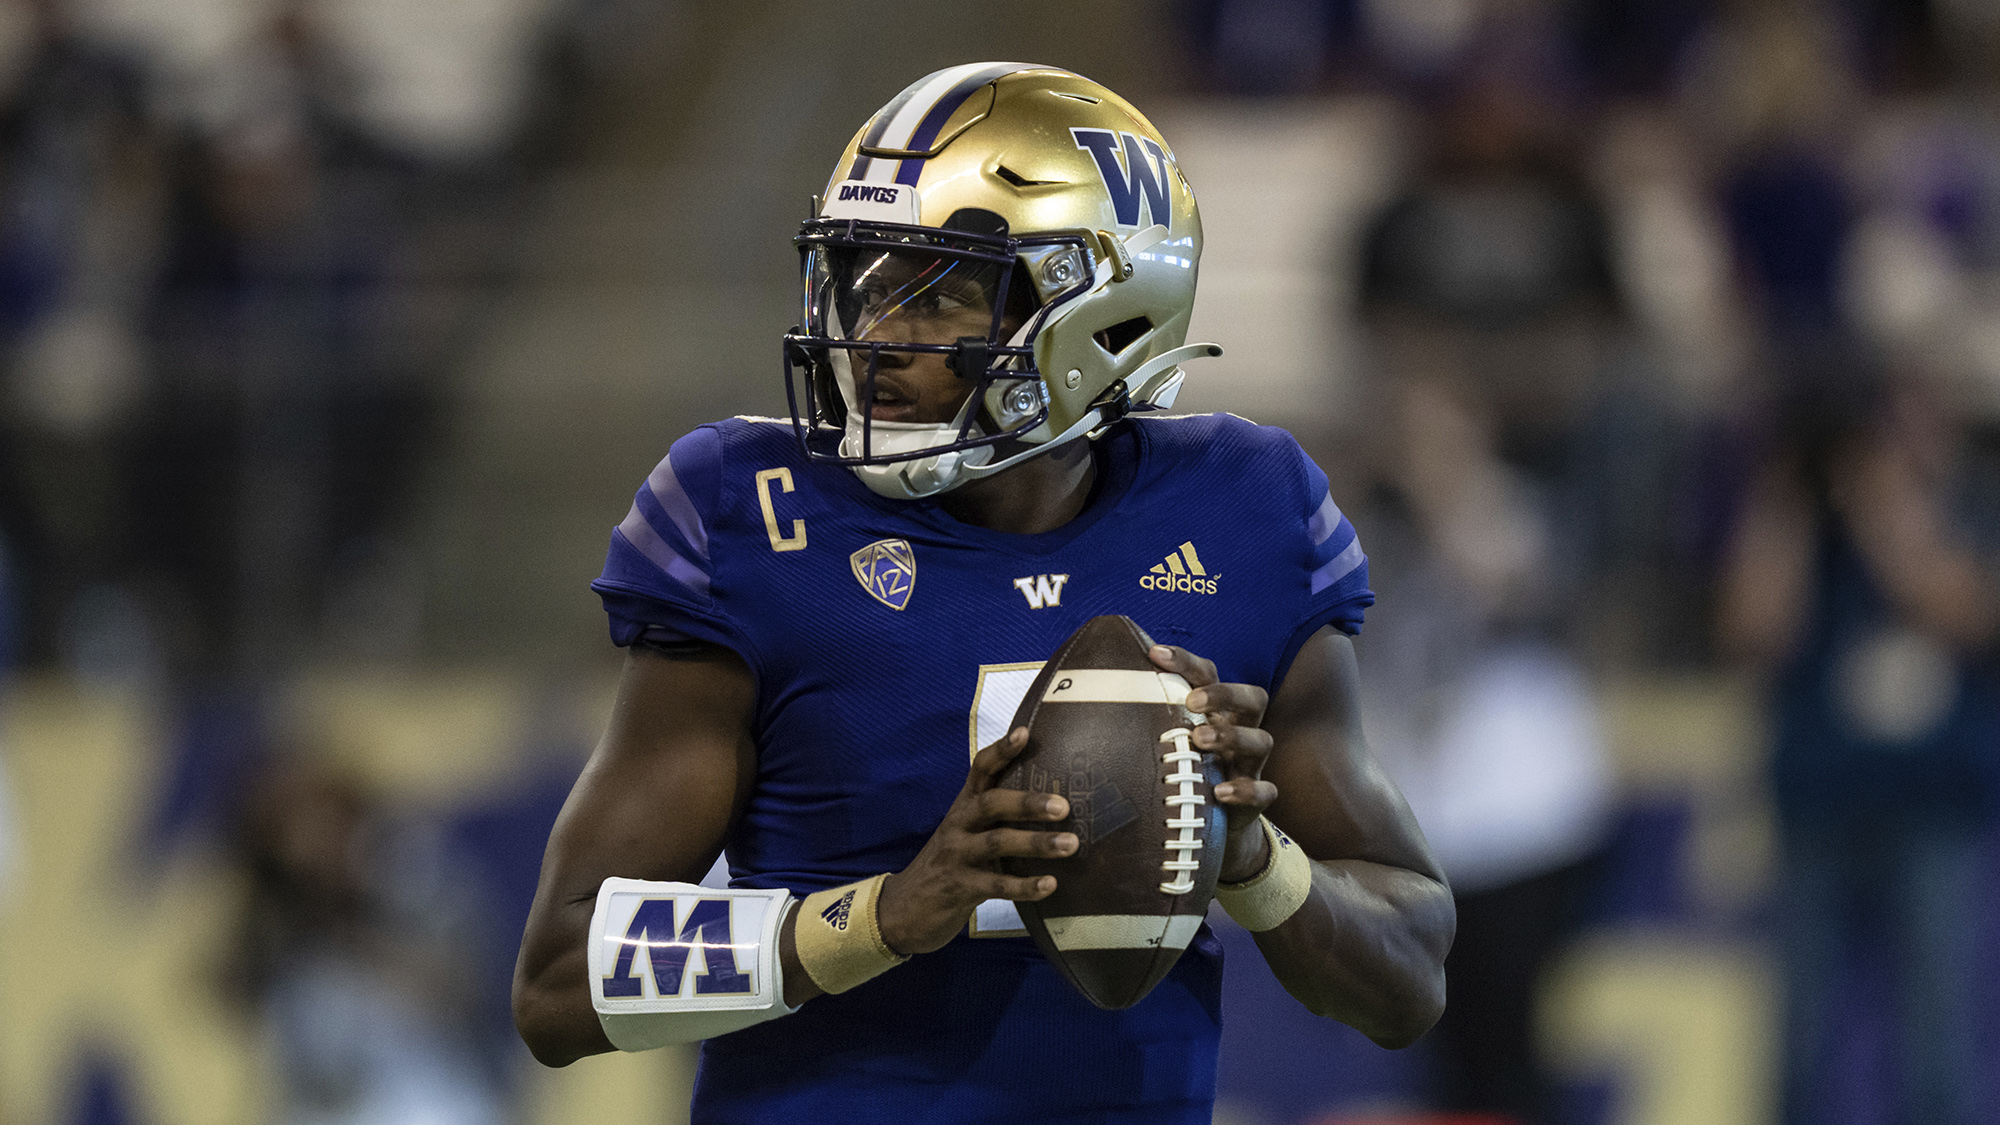 Washington quarterback Michael Penix Jr. threw for 337 yards and two touchdowns on Saturday in a 52-6 win over Portland State.